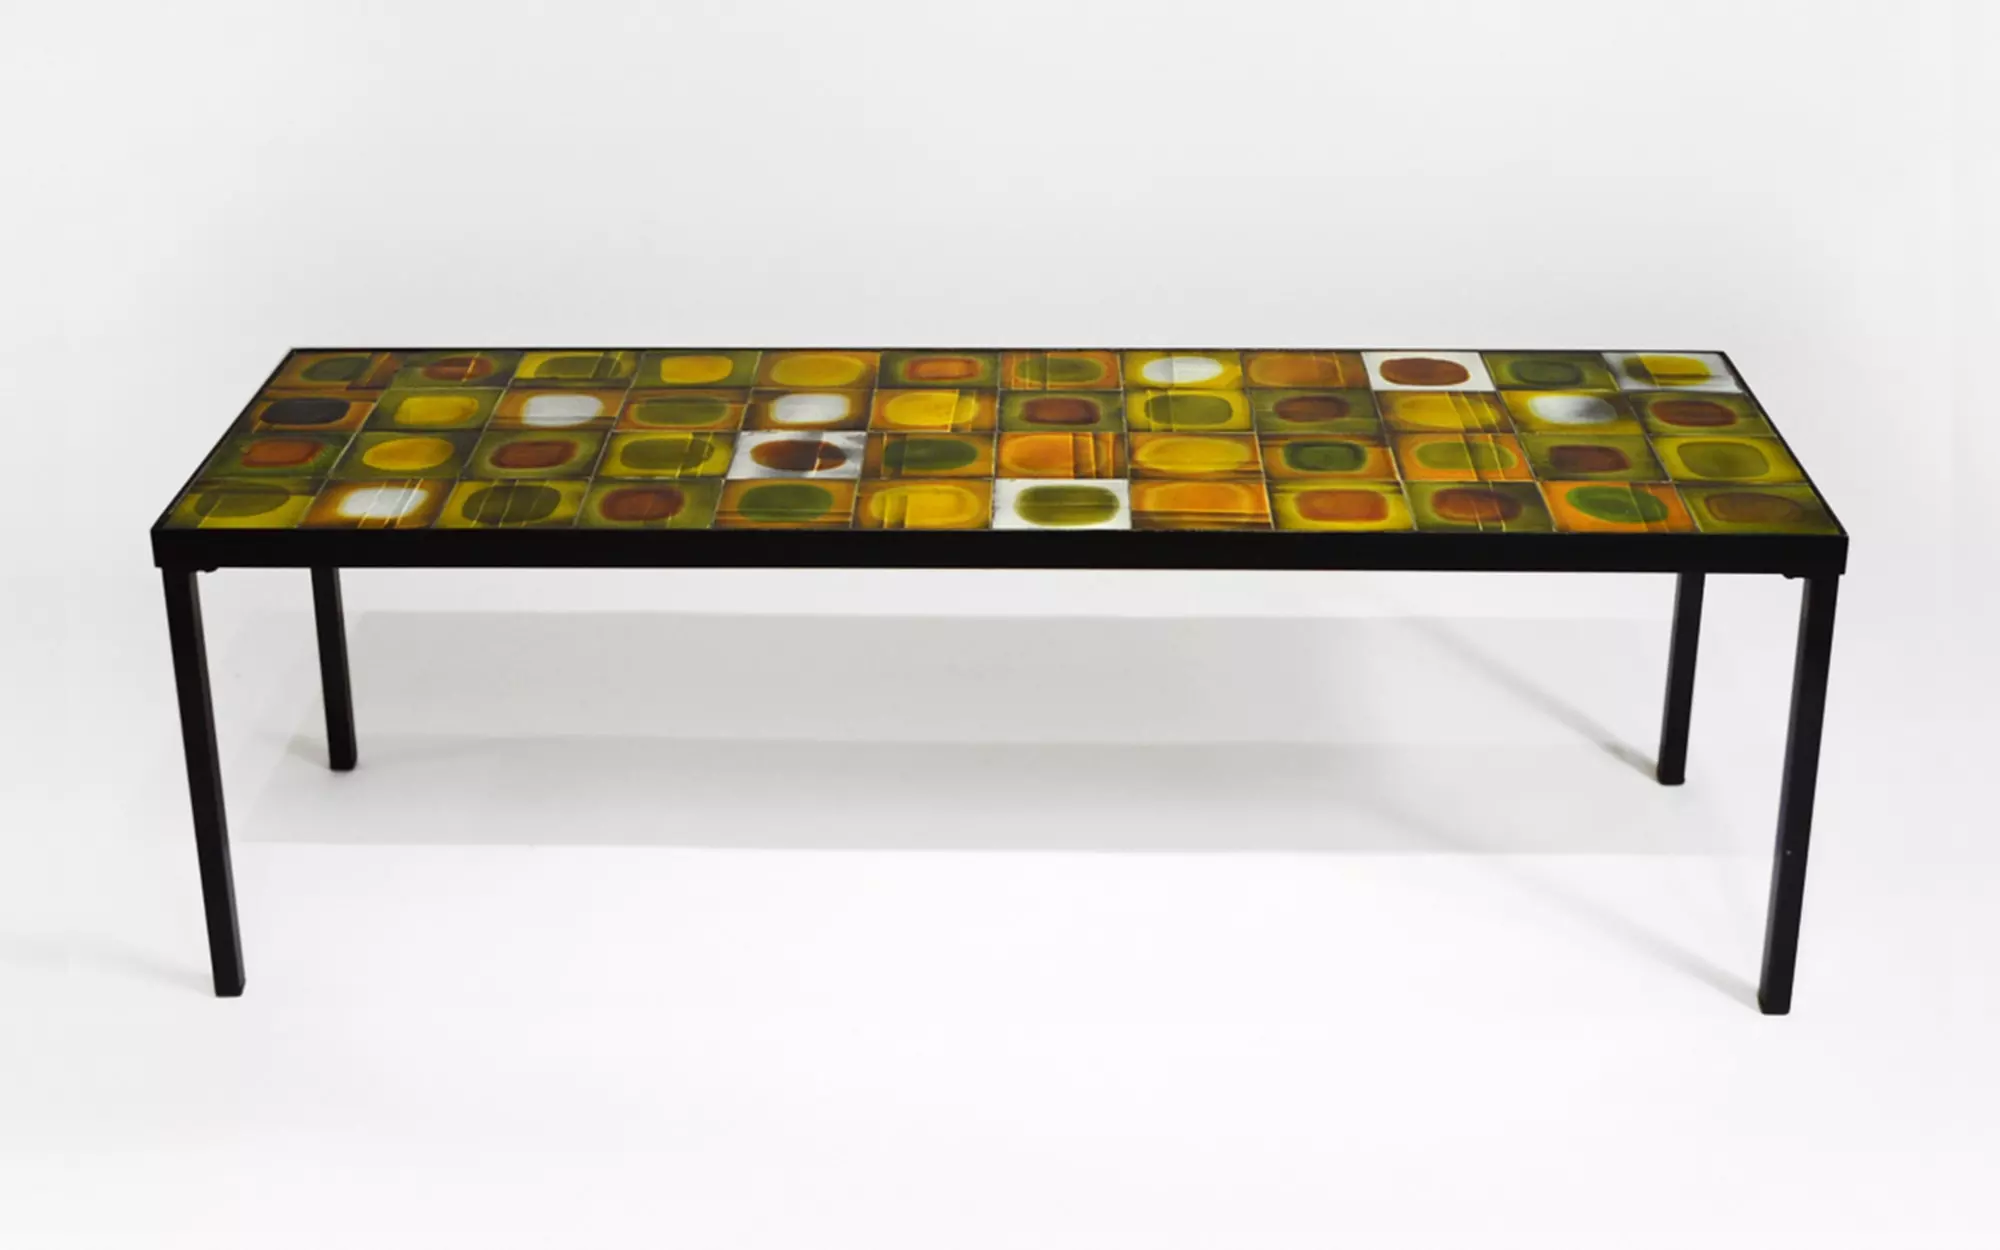 Planet - Roger Capron - coffee-table - Galerie kreo